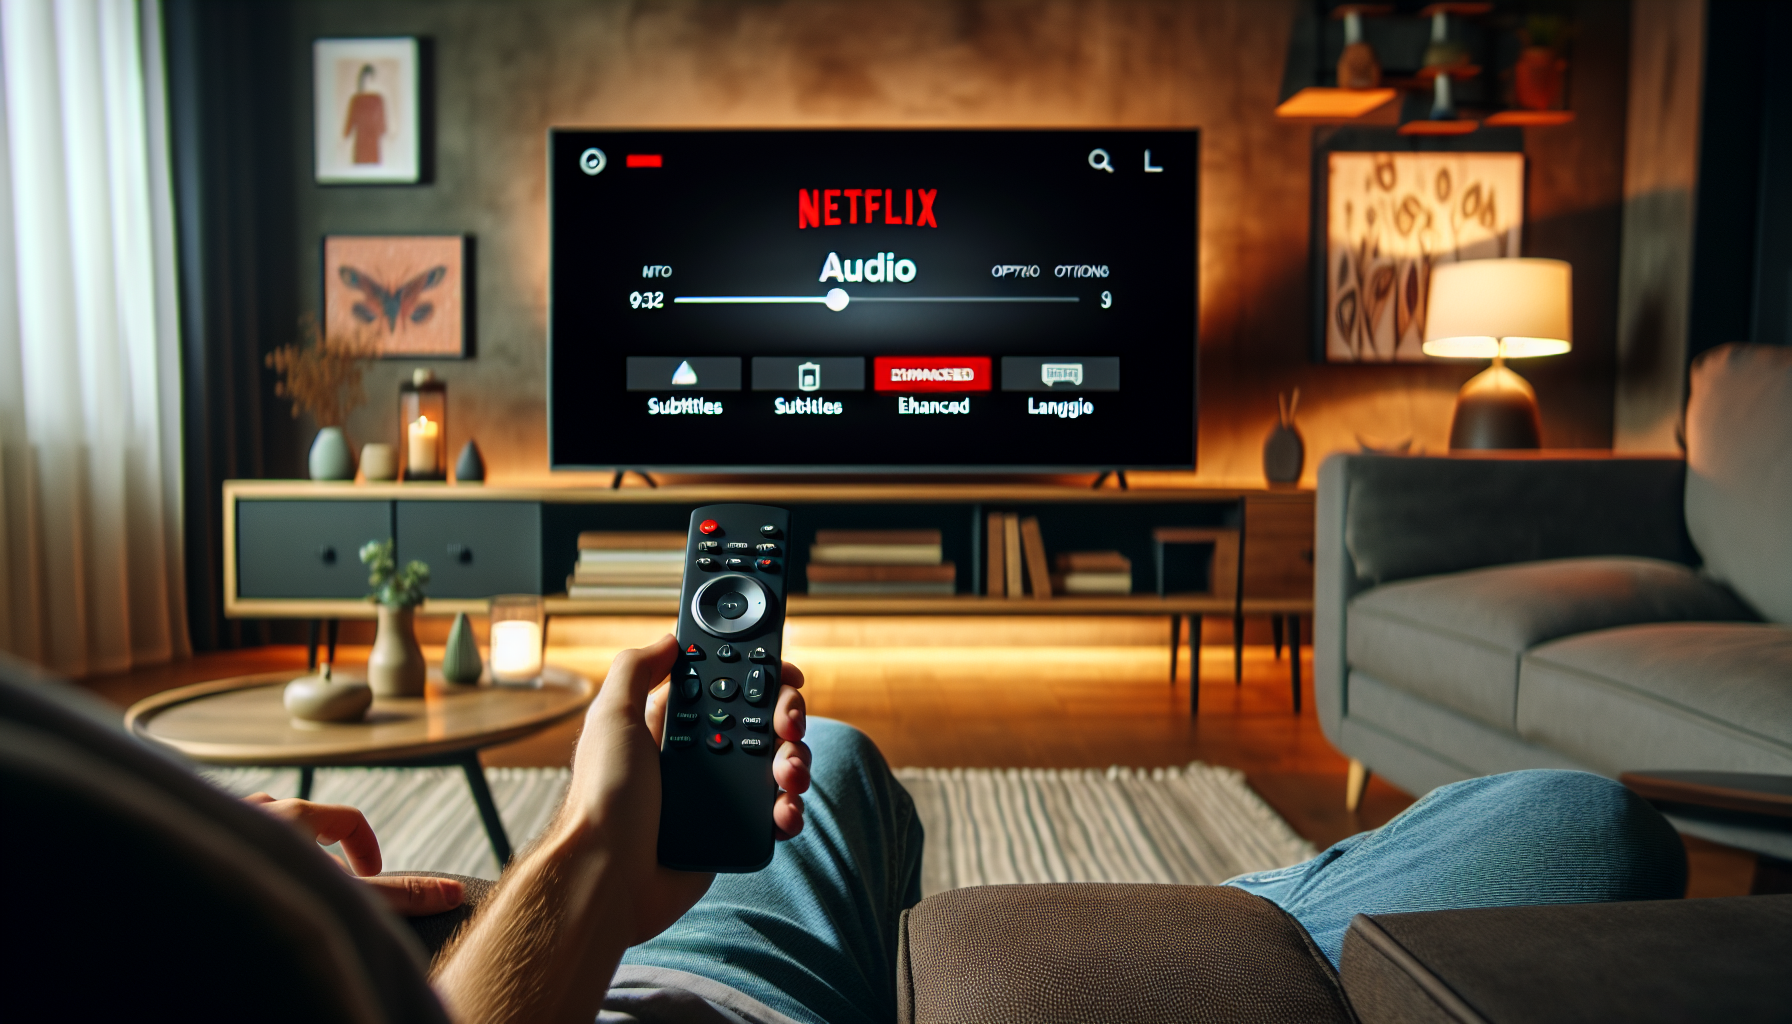 Struggling with Audio Clarity on Netflix? This Simple Solution Can Help